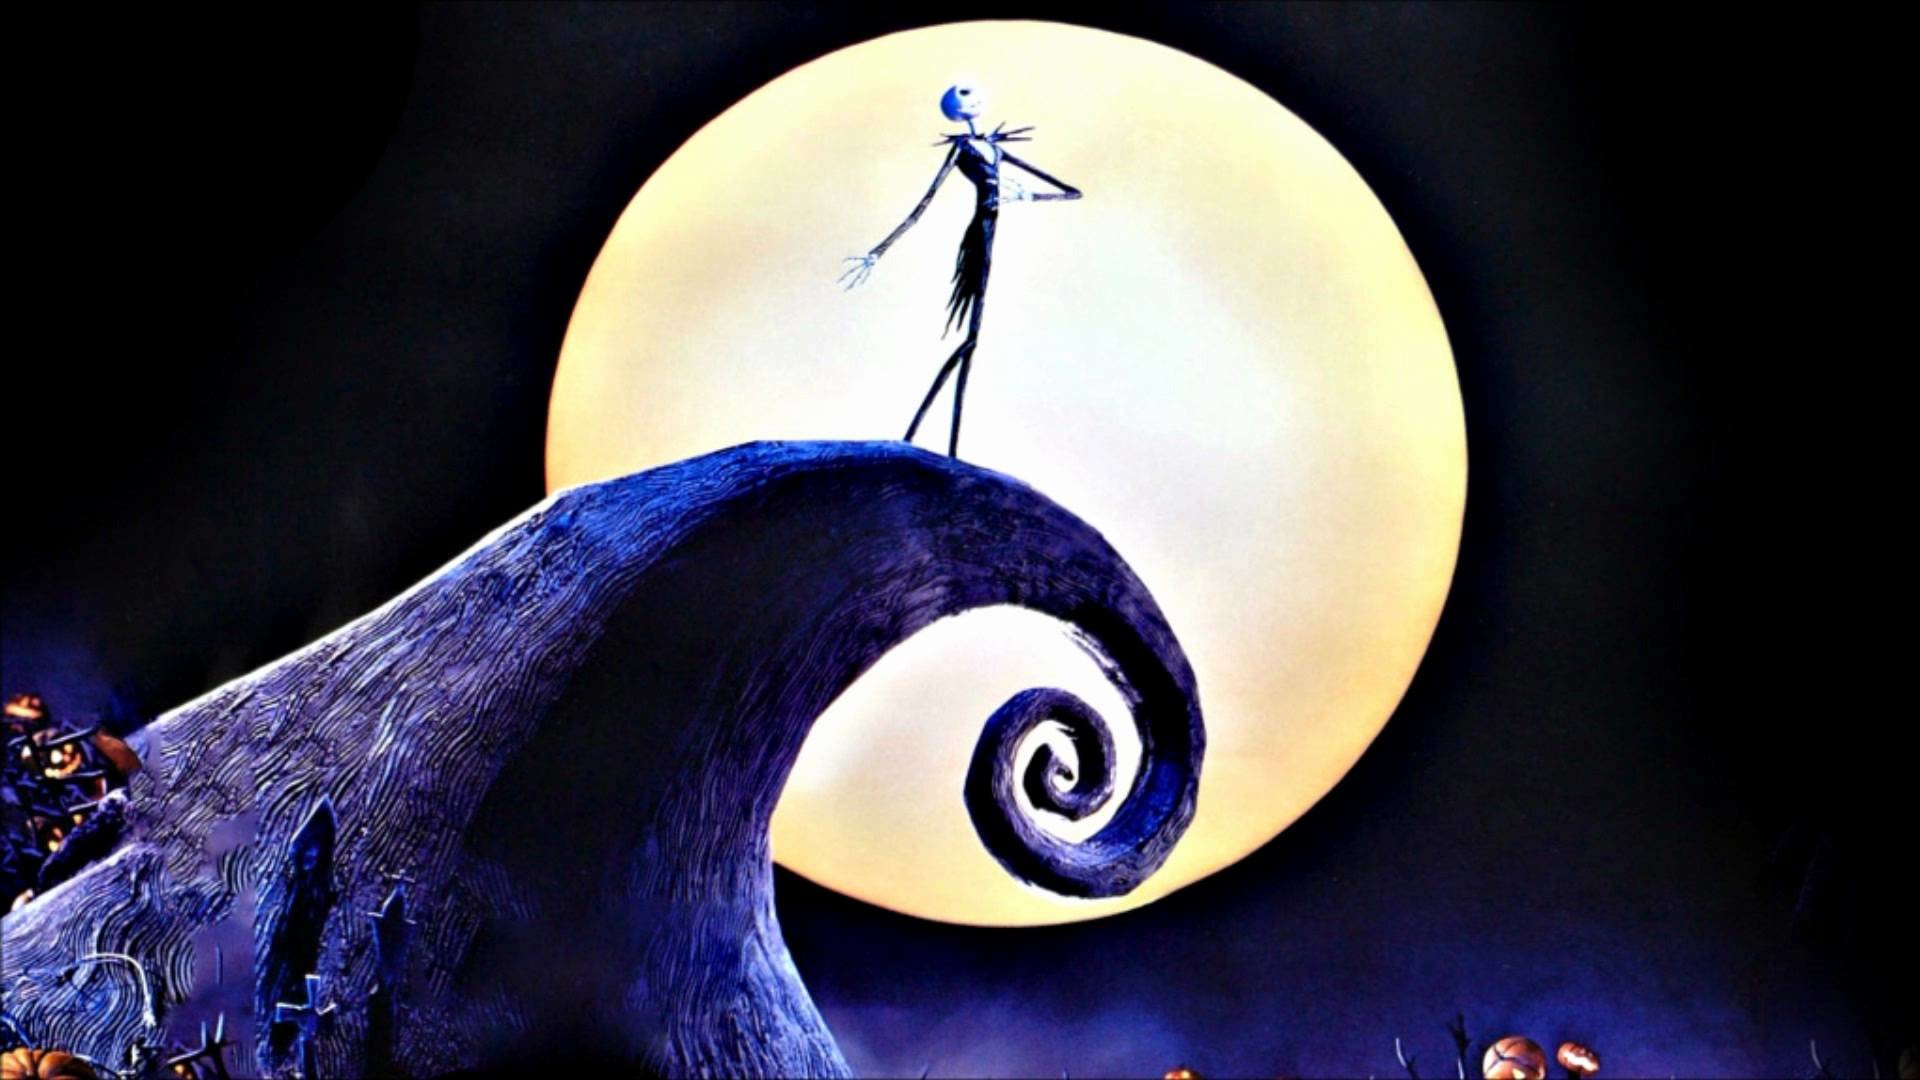 Free download Nightmare Before Christmas Wallpaper HD 75 images